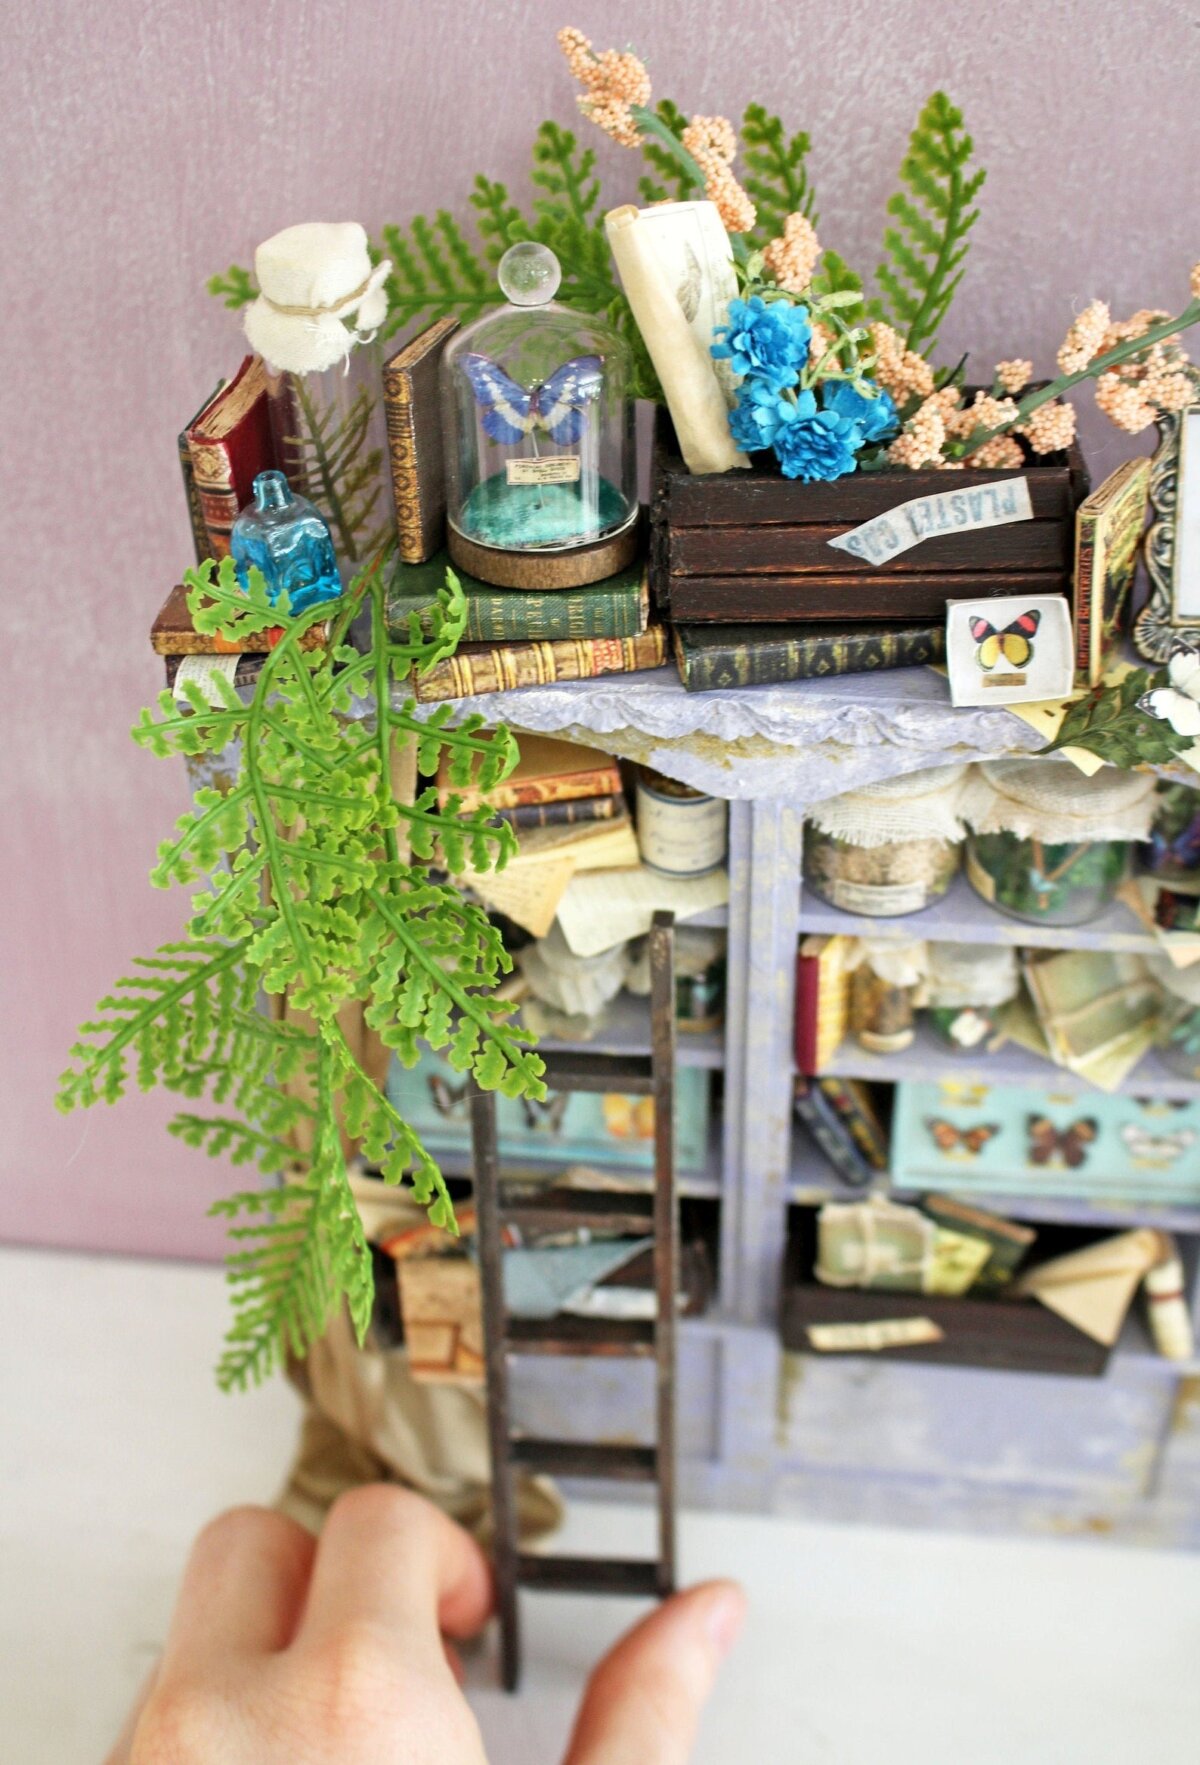 Whimsical And Intricate Miniatures Of Vintage Objects By Lauren Delaney George 11